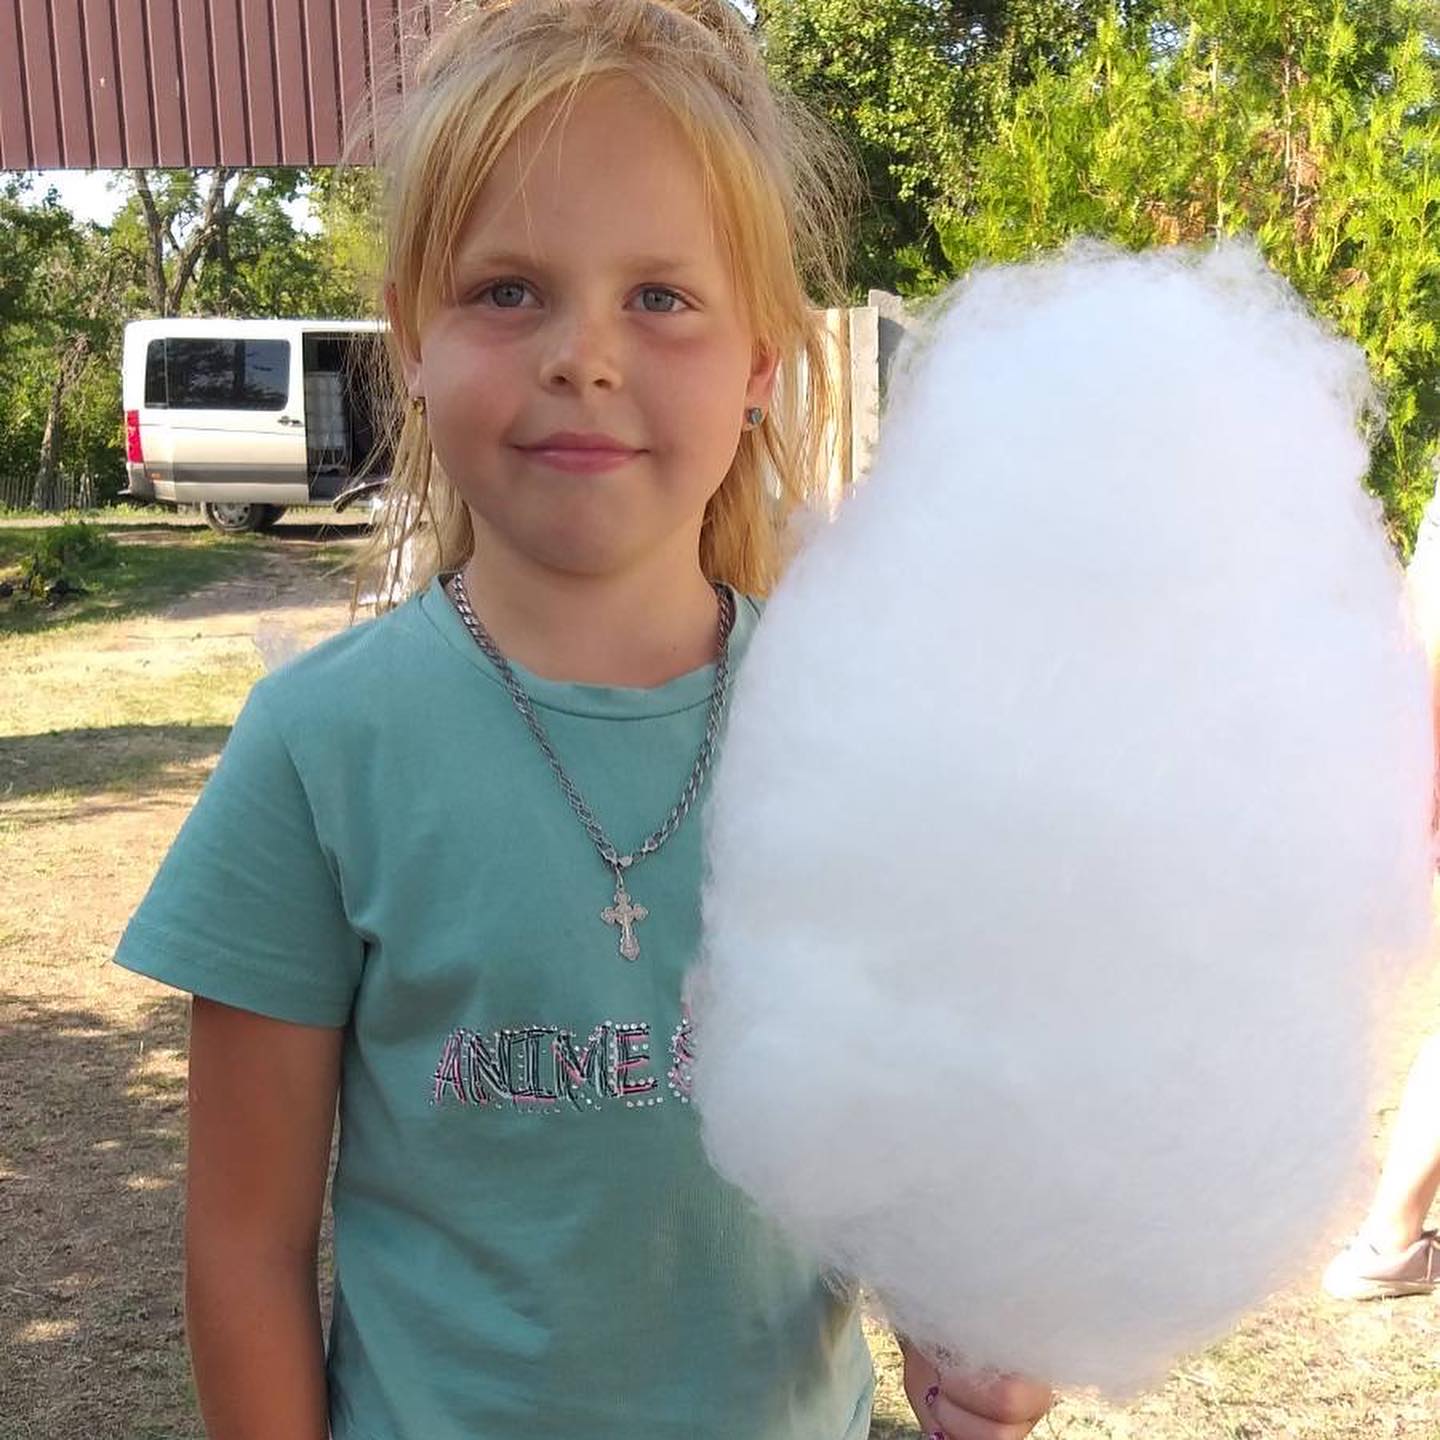 A young girl holding up a large cotton candy.